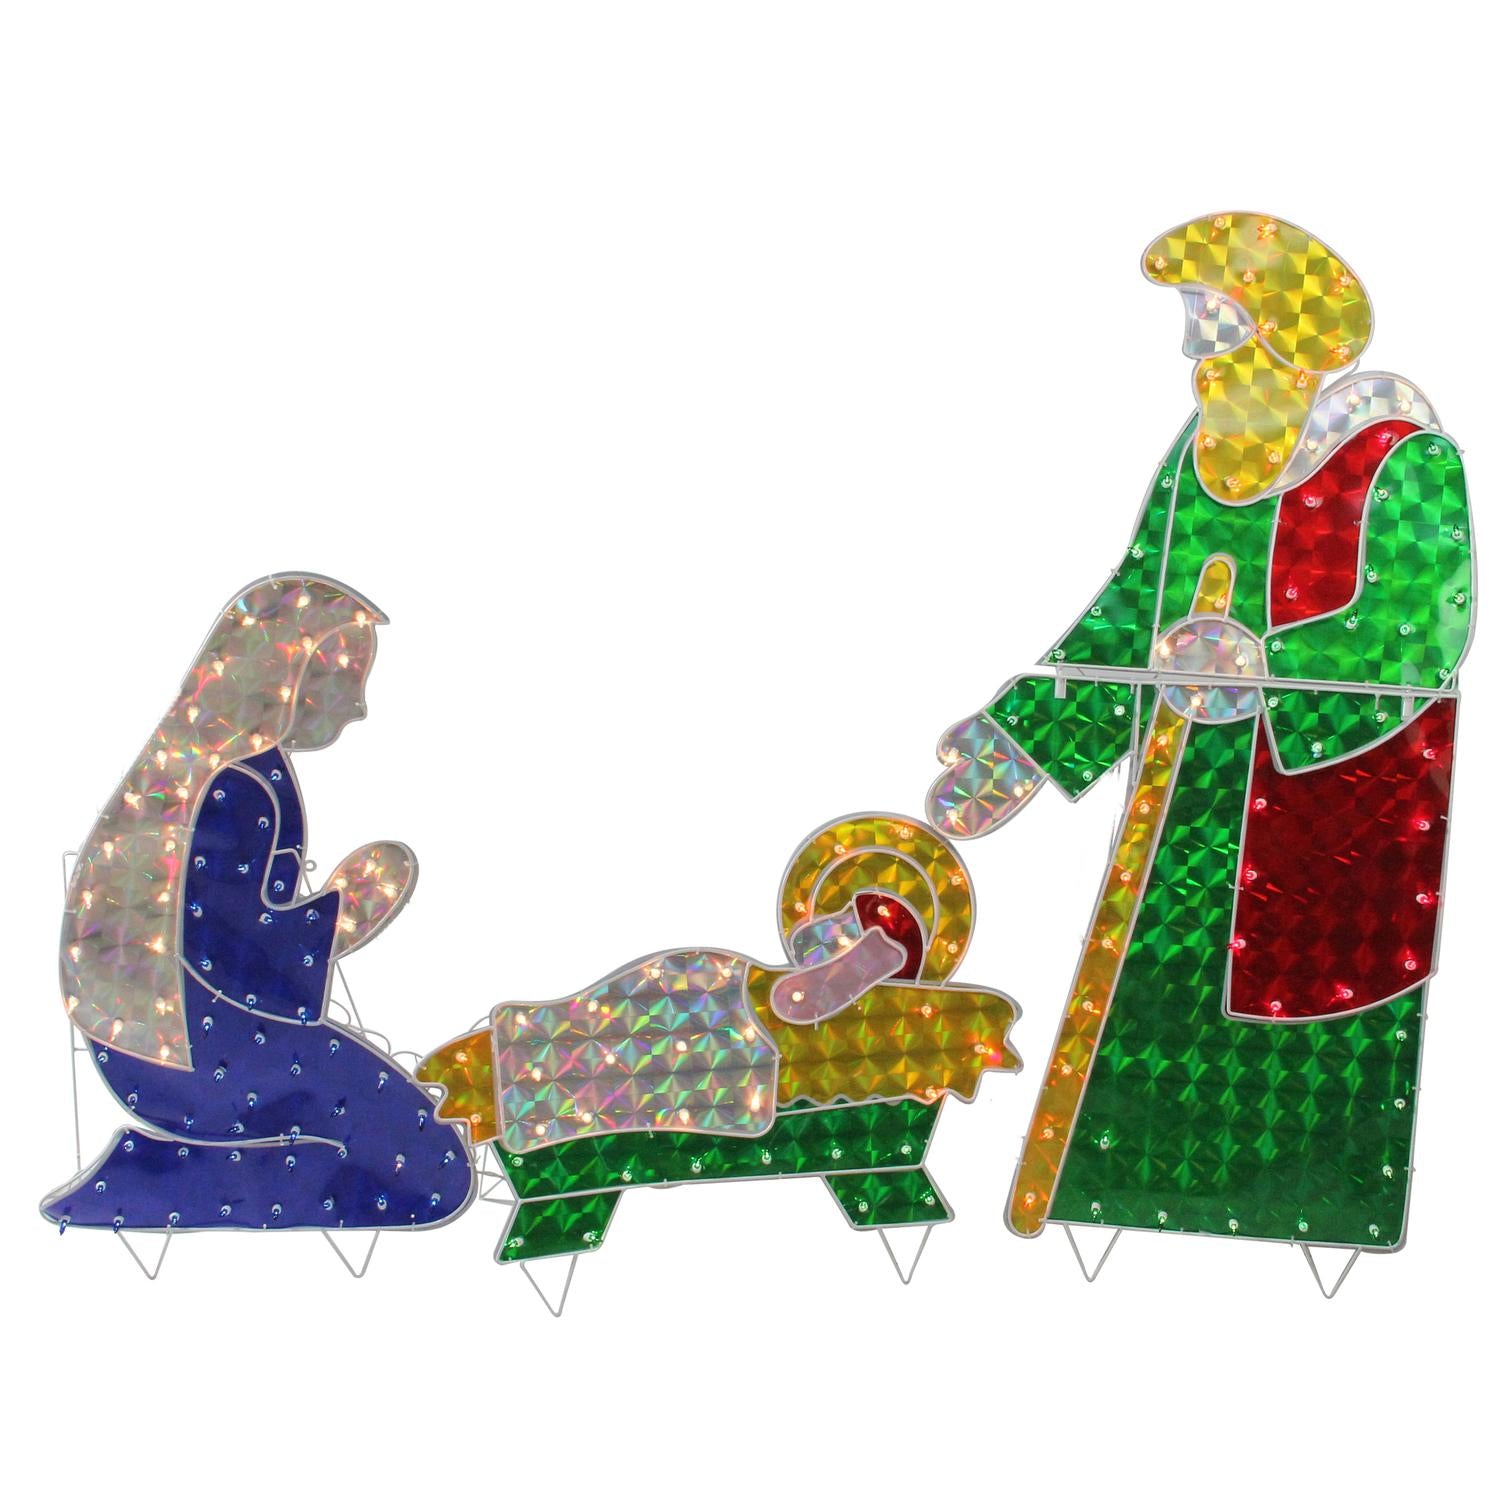 3-Piece Holographic Lighted Christmas Nativity Set Outdoor Decoration 42"